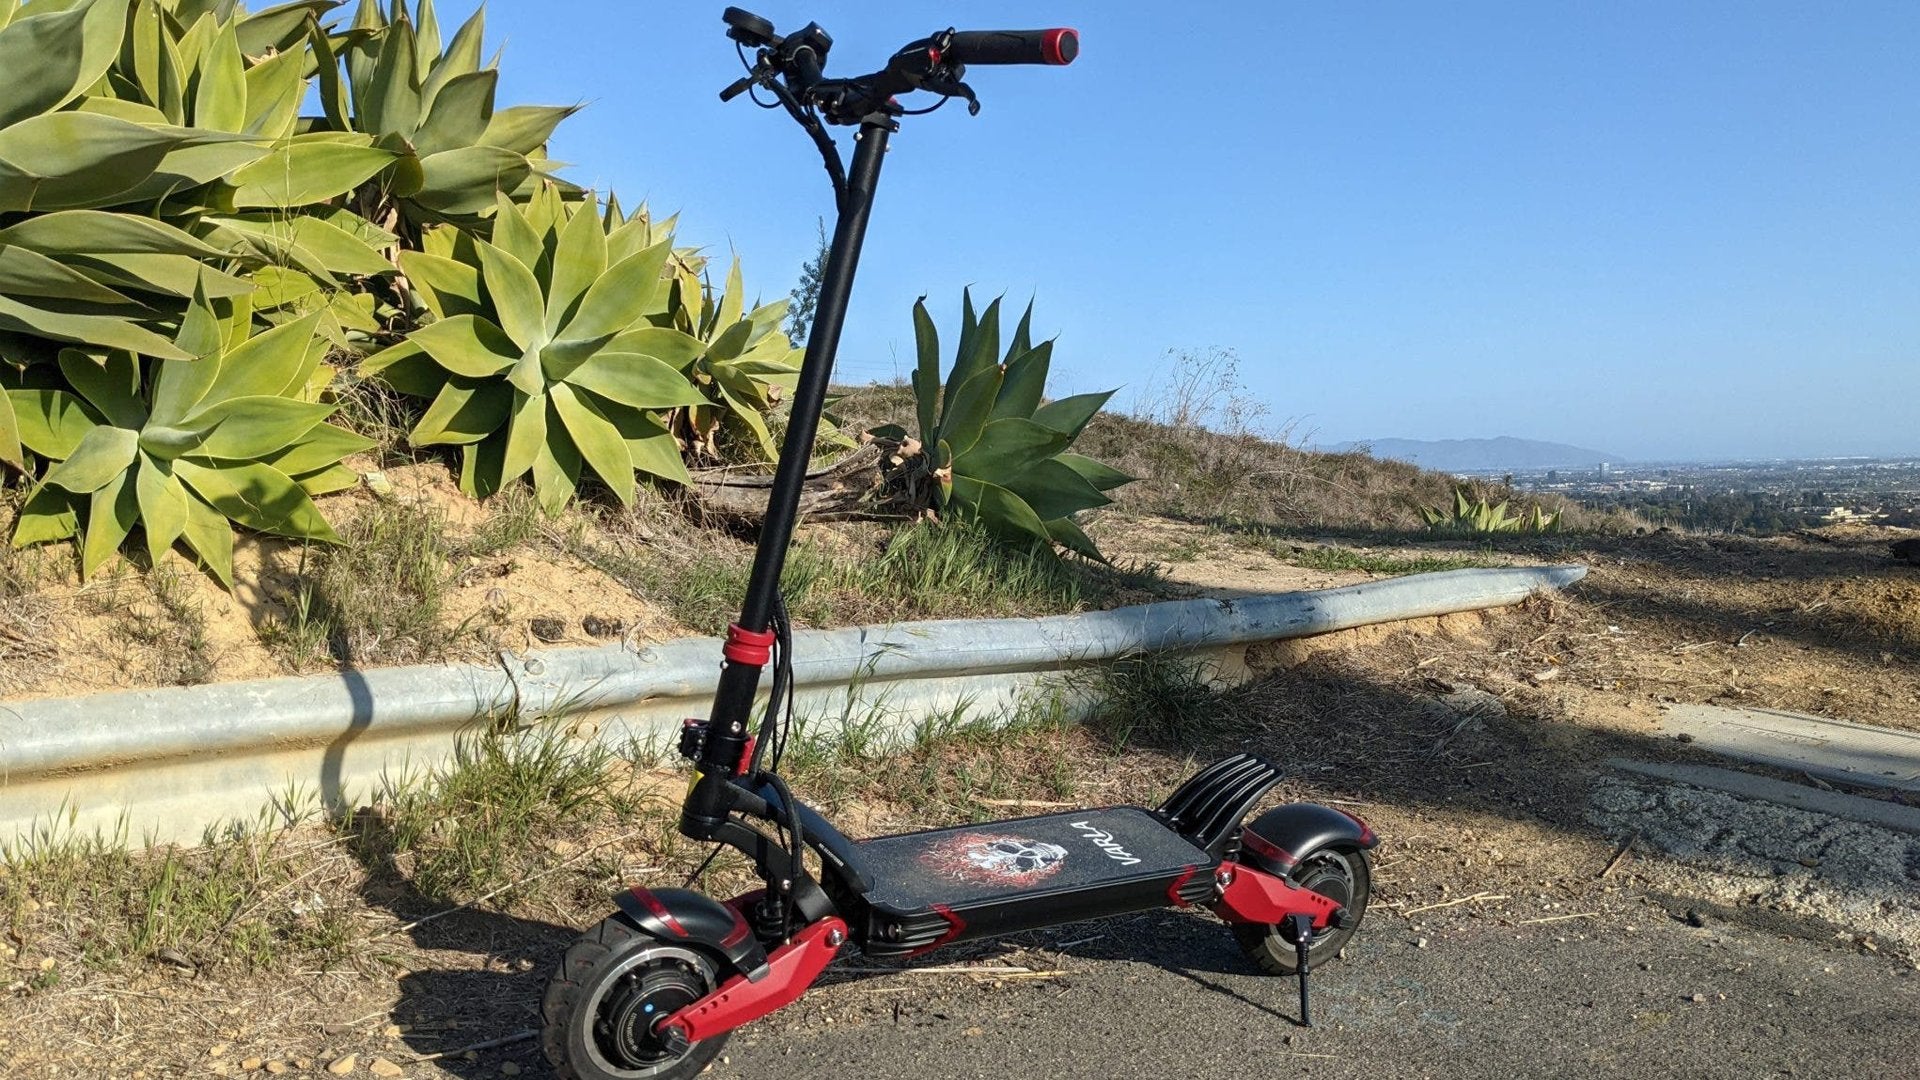 How Is Urban Transport Changing With The Electric Scooter?